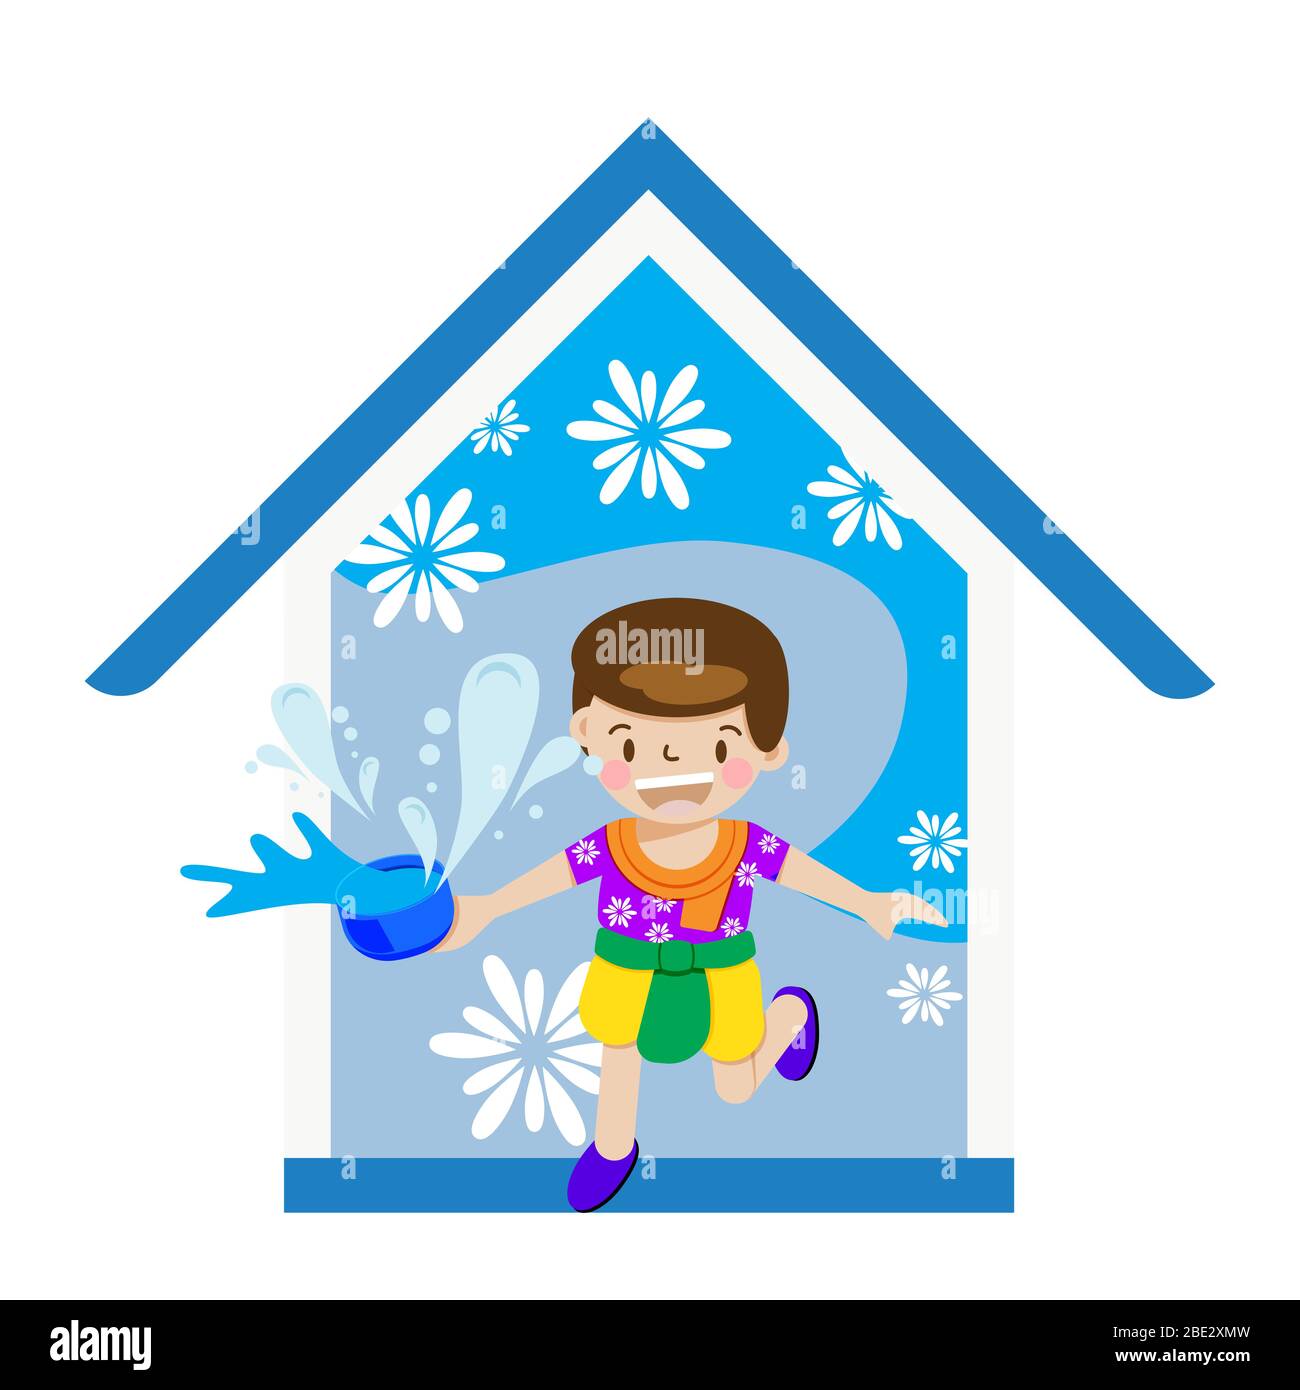 Stay home save life concept. Thai New Year during covid-19 coronavirus outbreak. Boy stay at home playing splash water for Songkran festival in Thaila Stock Vector